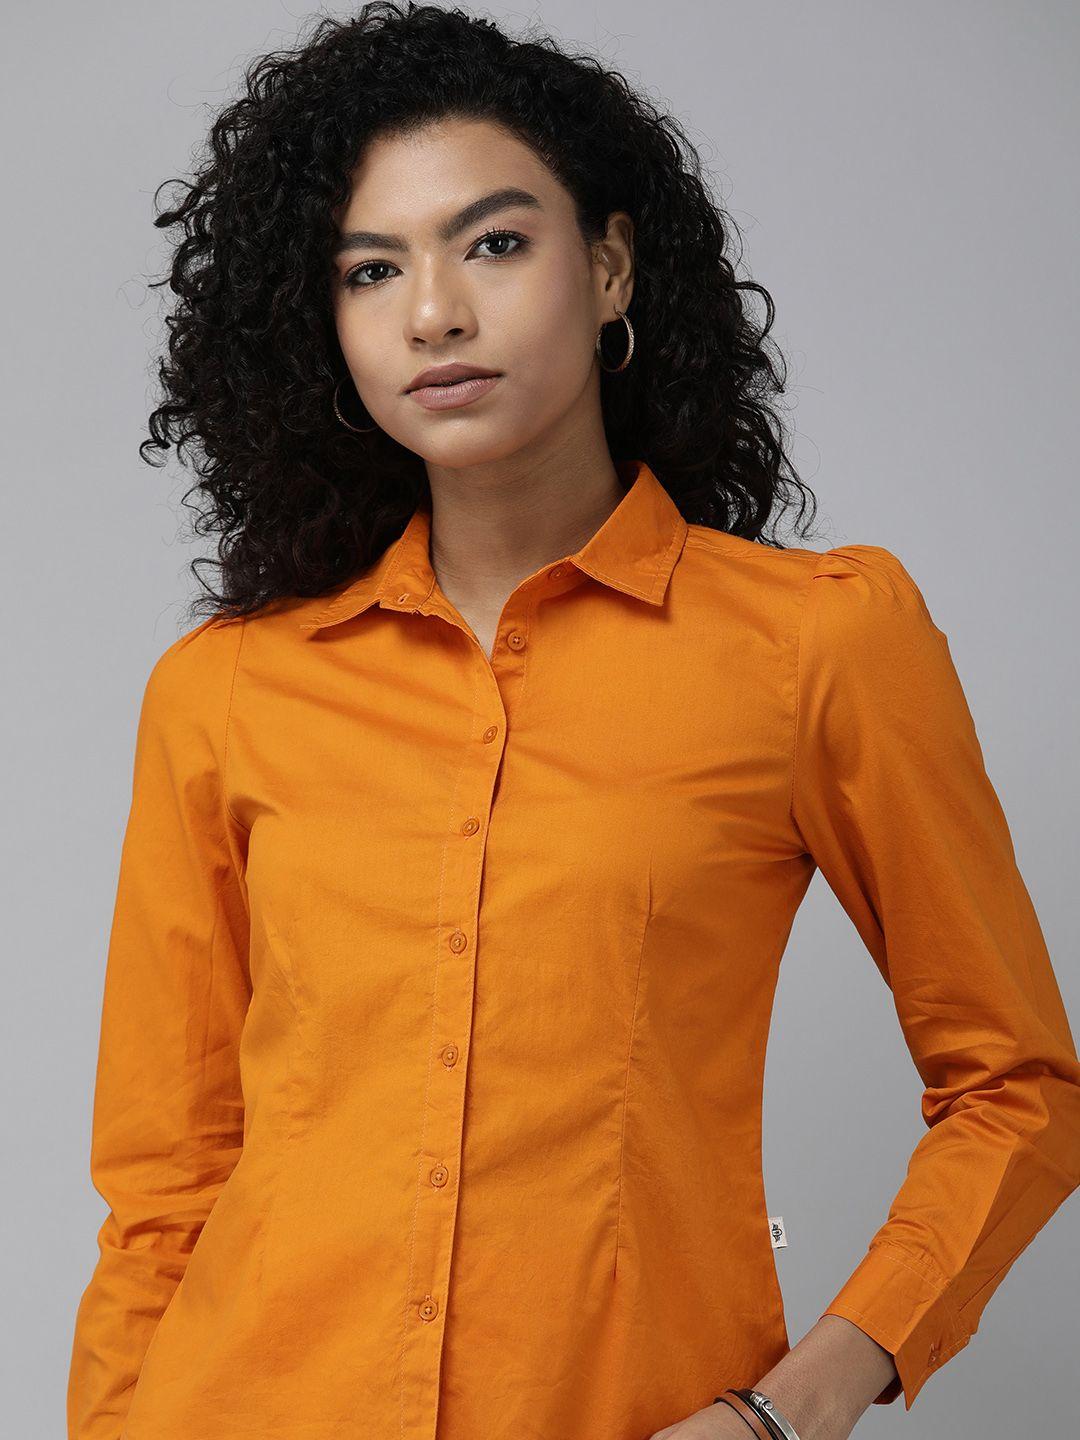 the roadster lifestyle co. women pure cotton solid regular fit casual shirt